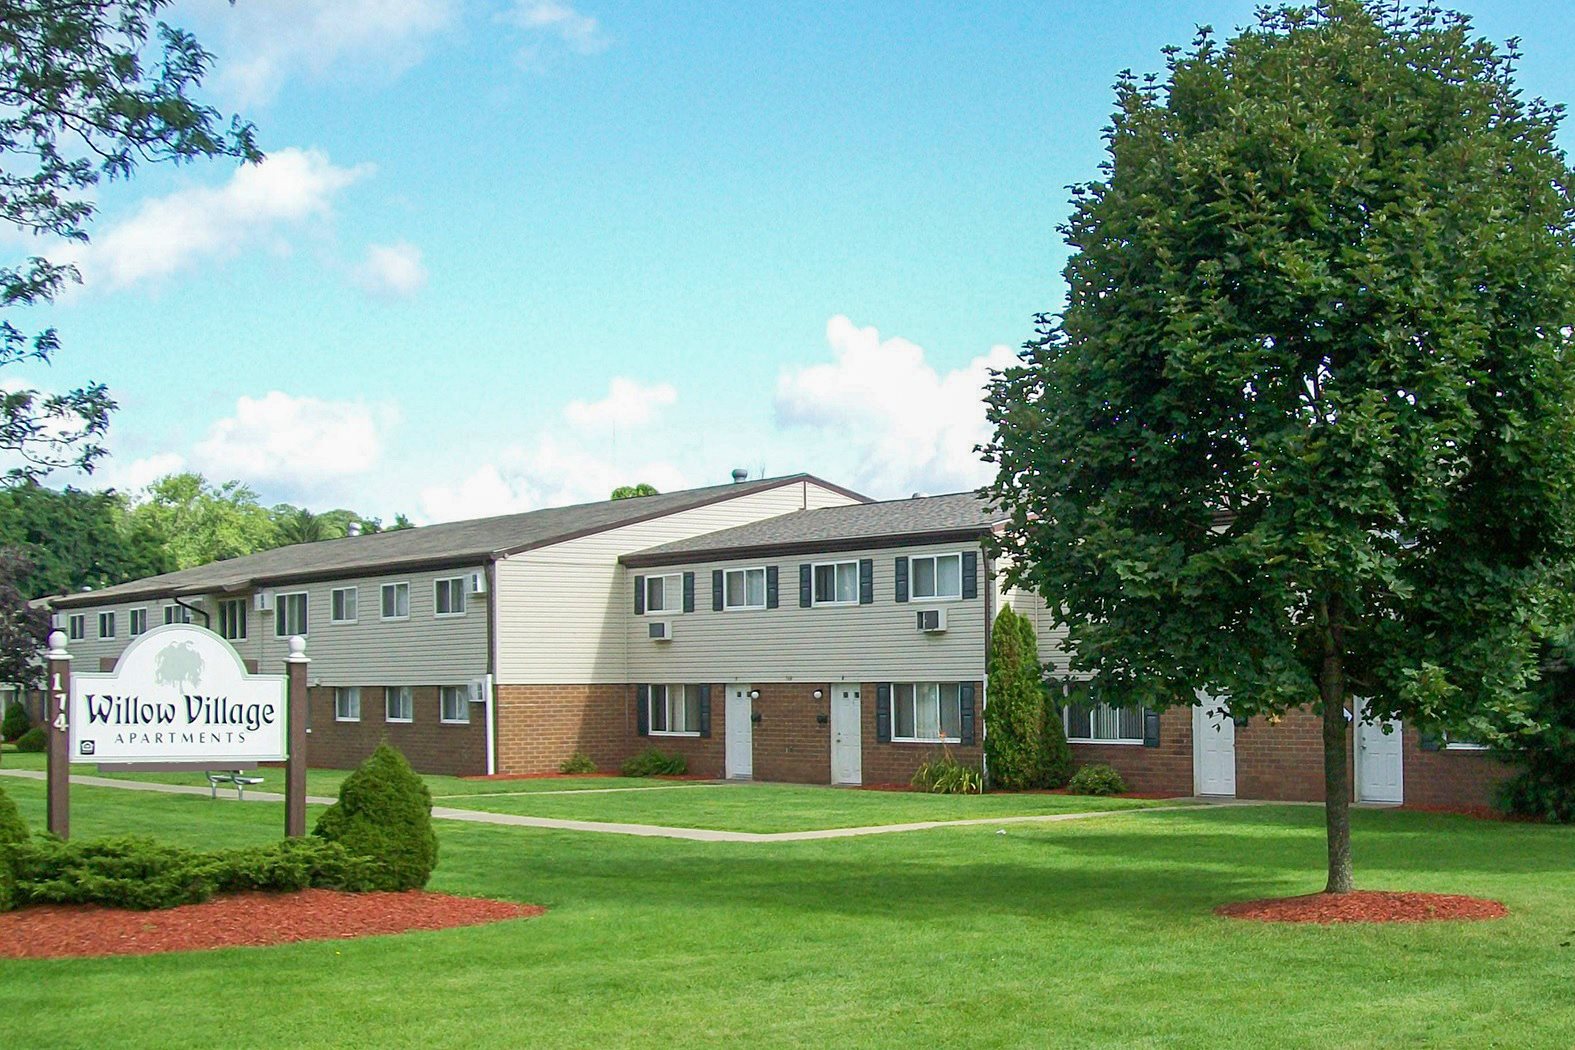 WILLOW VILLAGE APARTMENTS